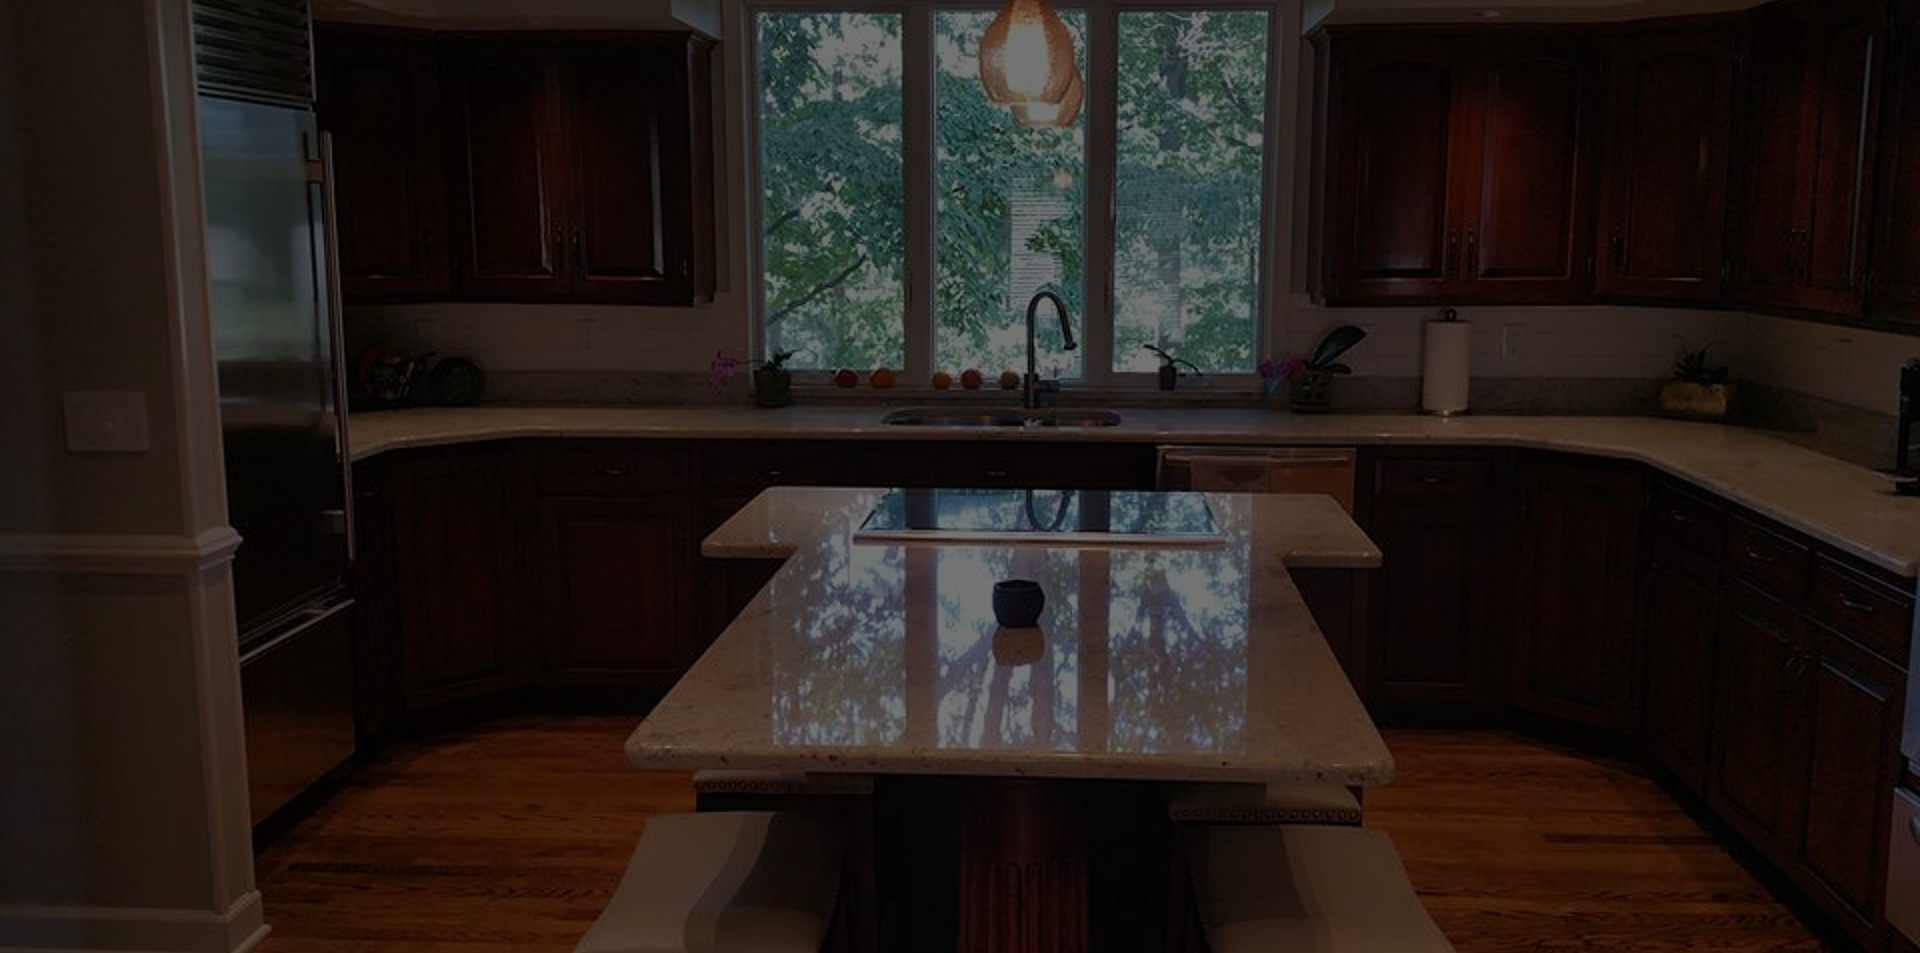 Cherry kitchen cabinets with white countertops